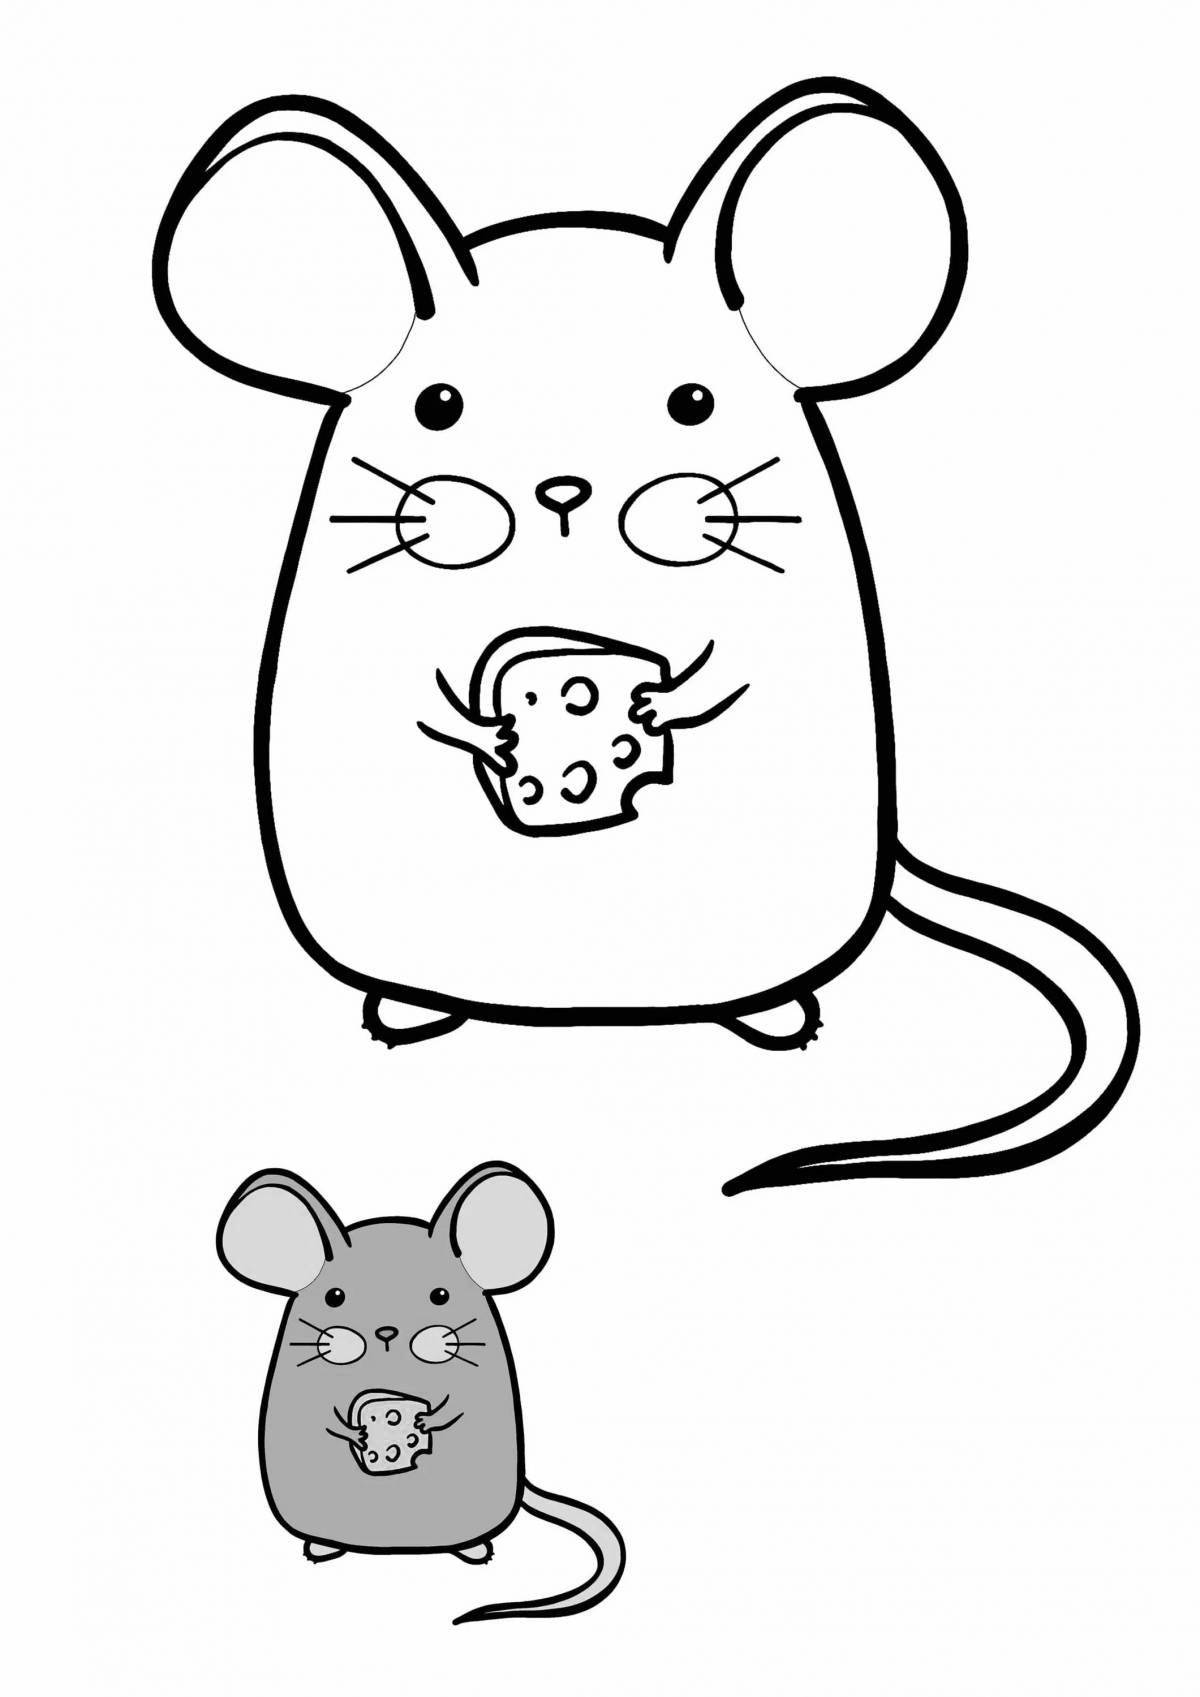 Adorable mouse coloring book for 4-5 year olds